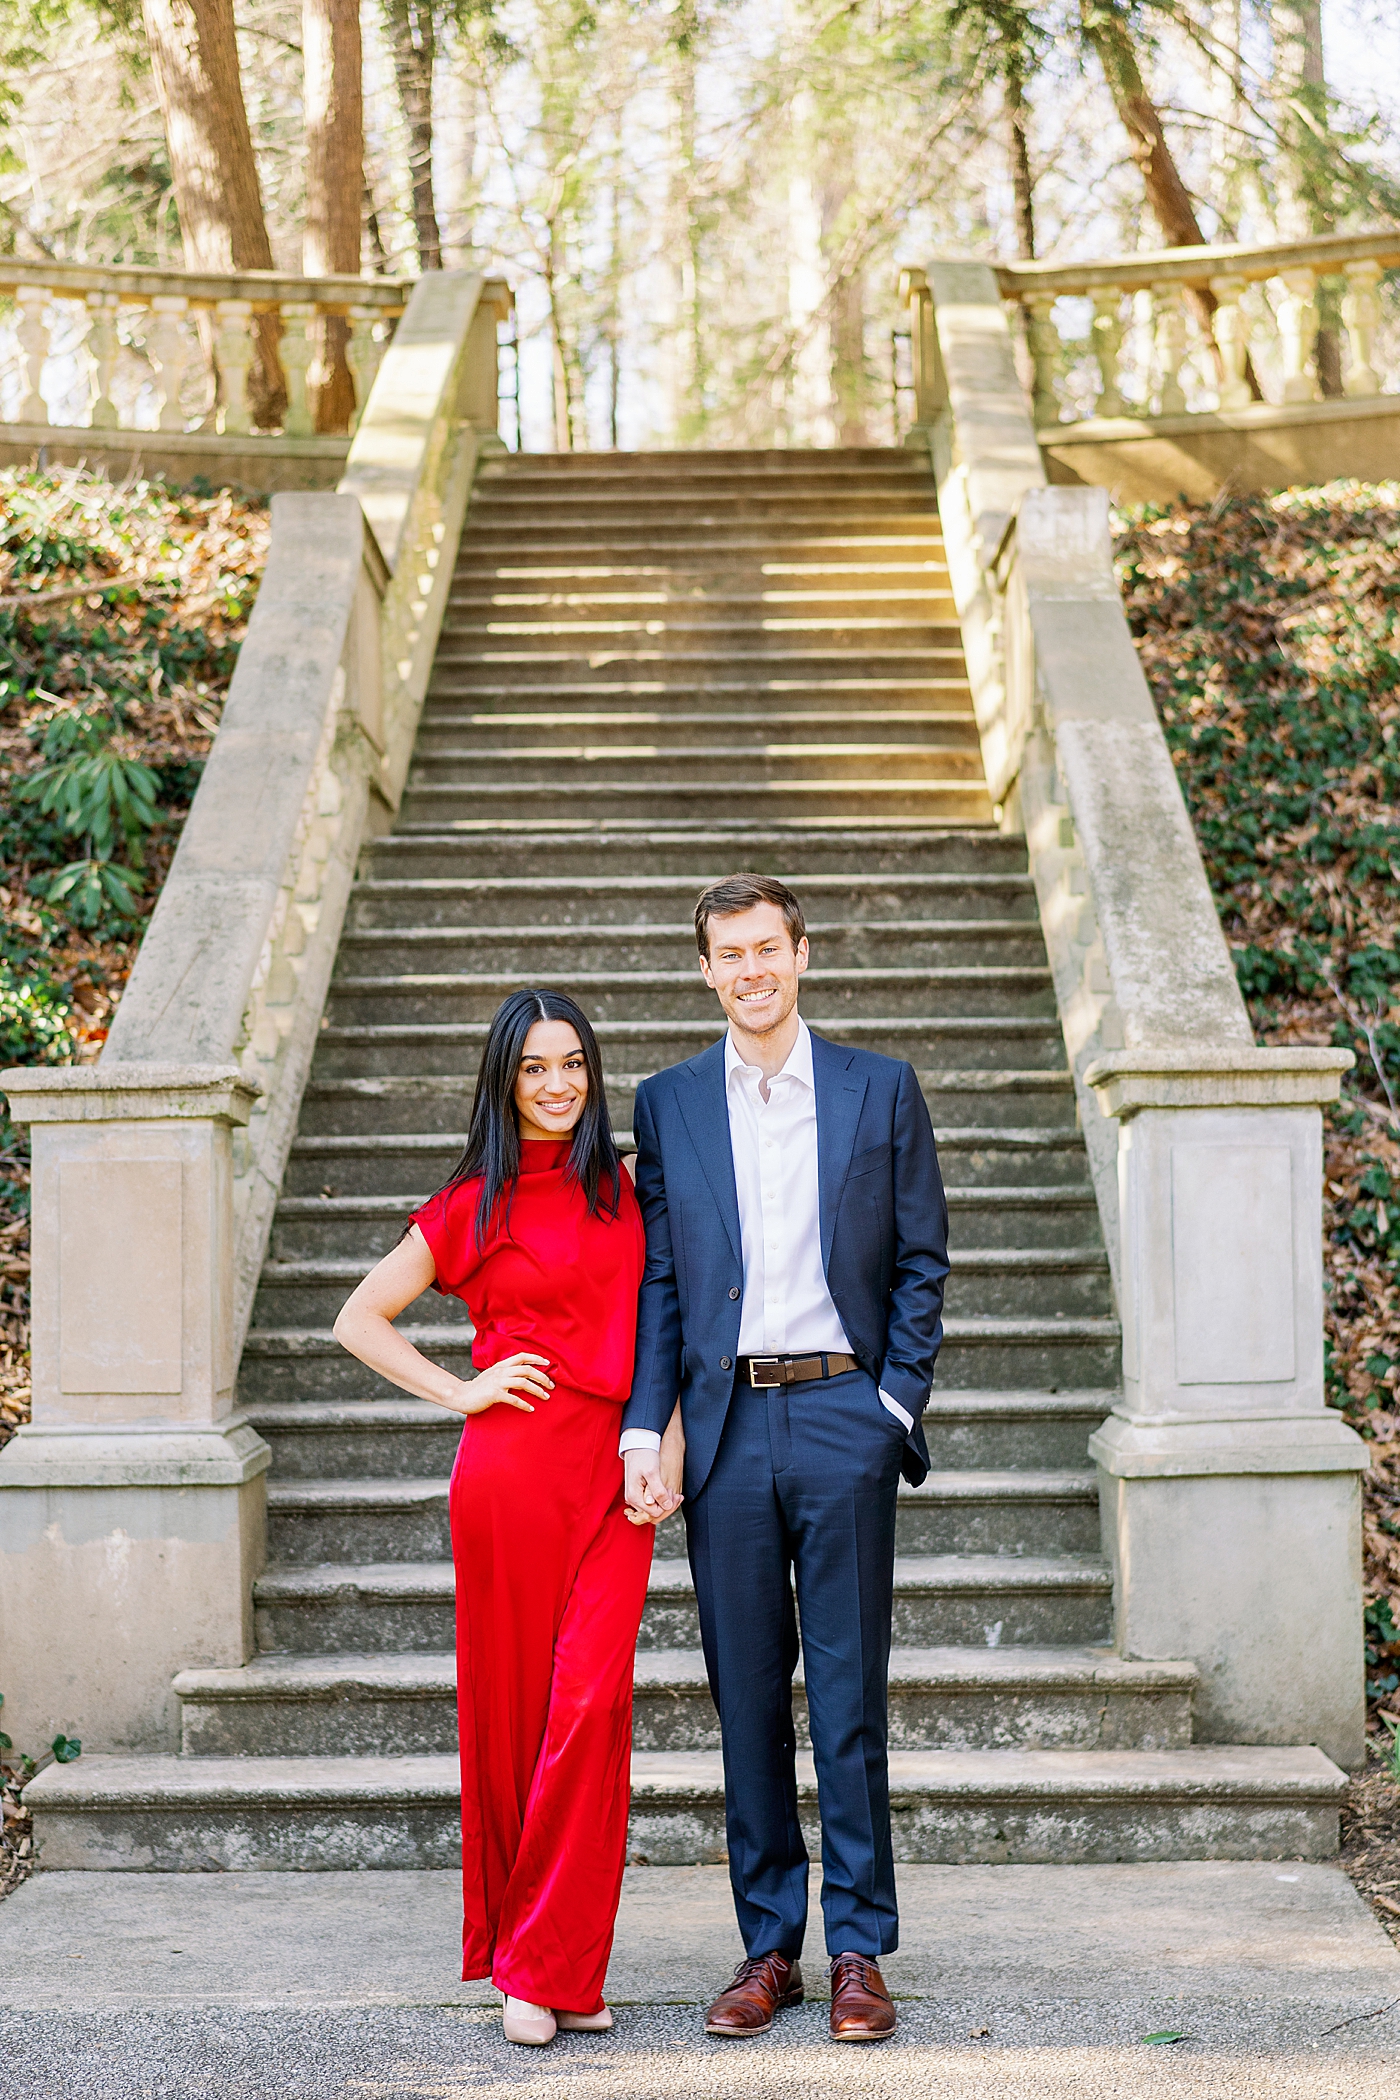 Couple holding hands posing in front of stone staircase | Image by Annie Laura Photo